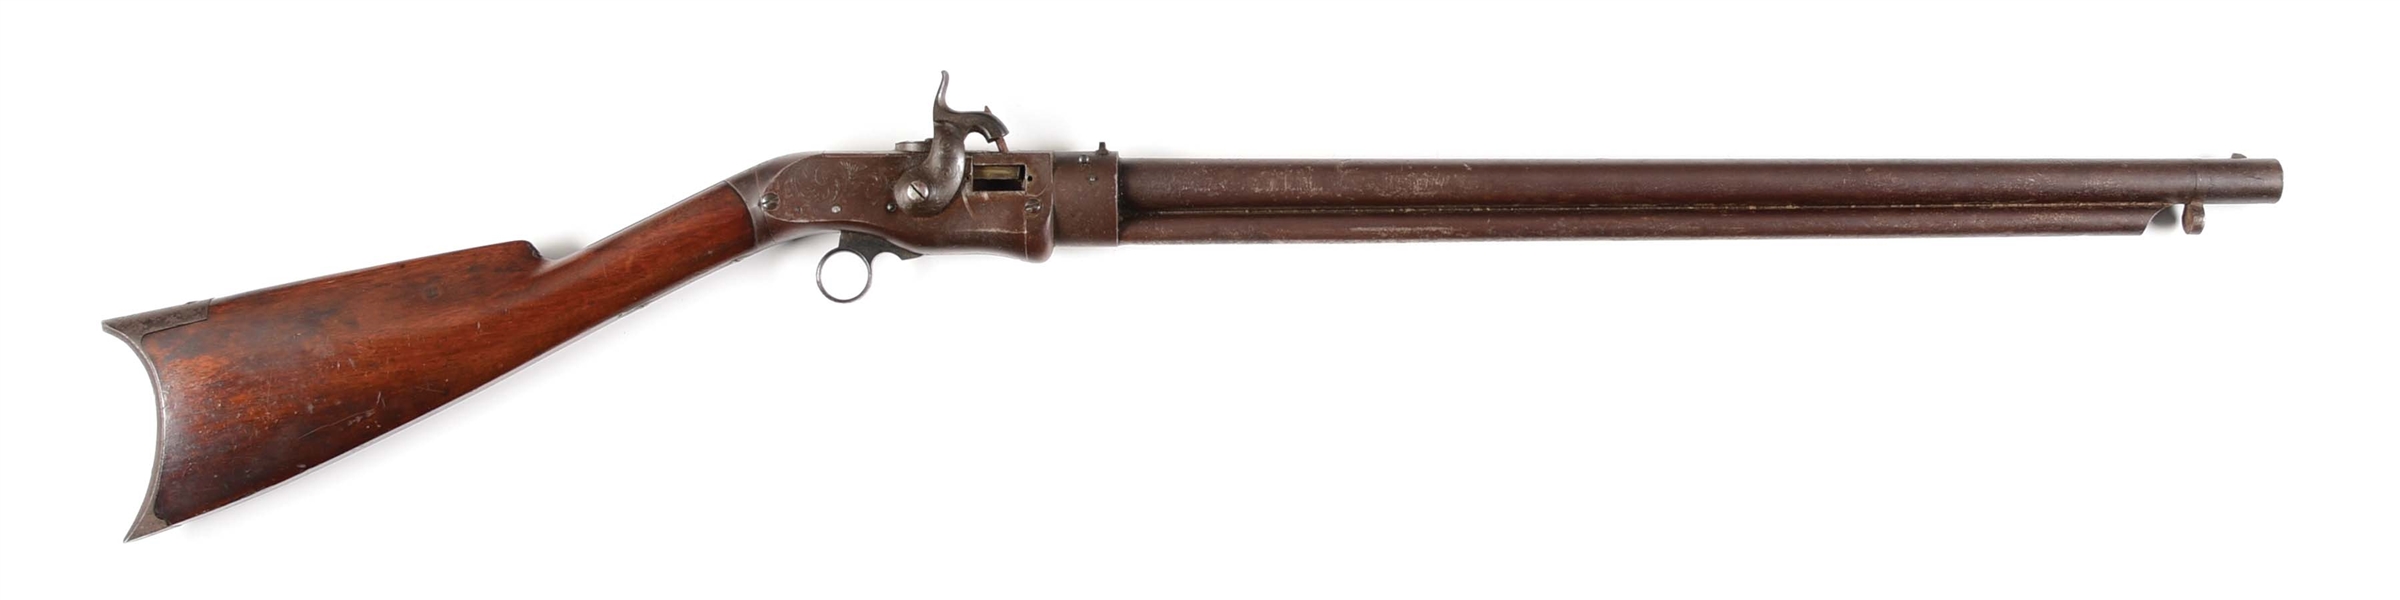 (A) RARE SMITH-JENNINGS REPEATING RIFLE.